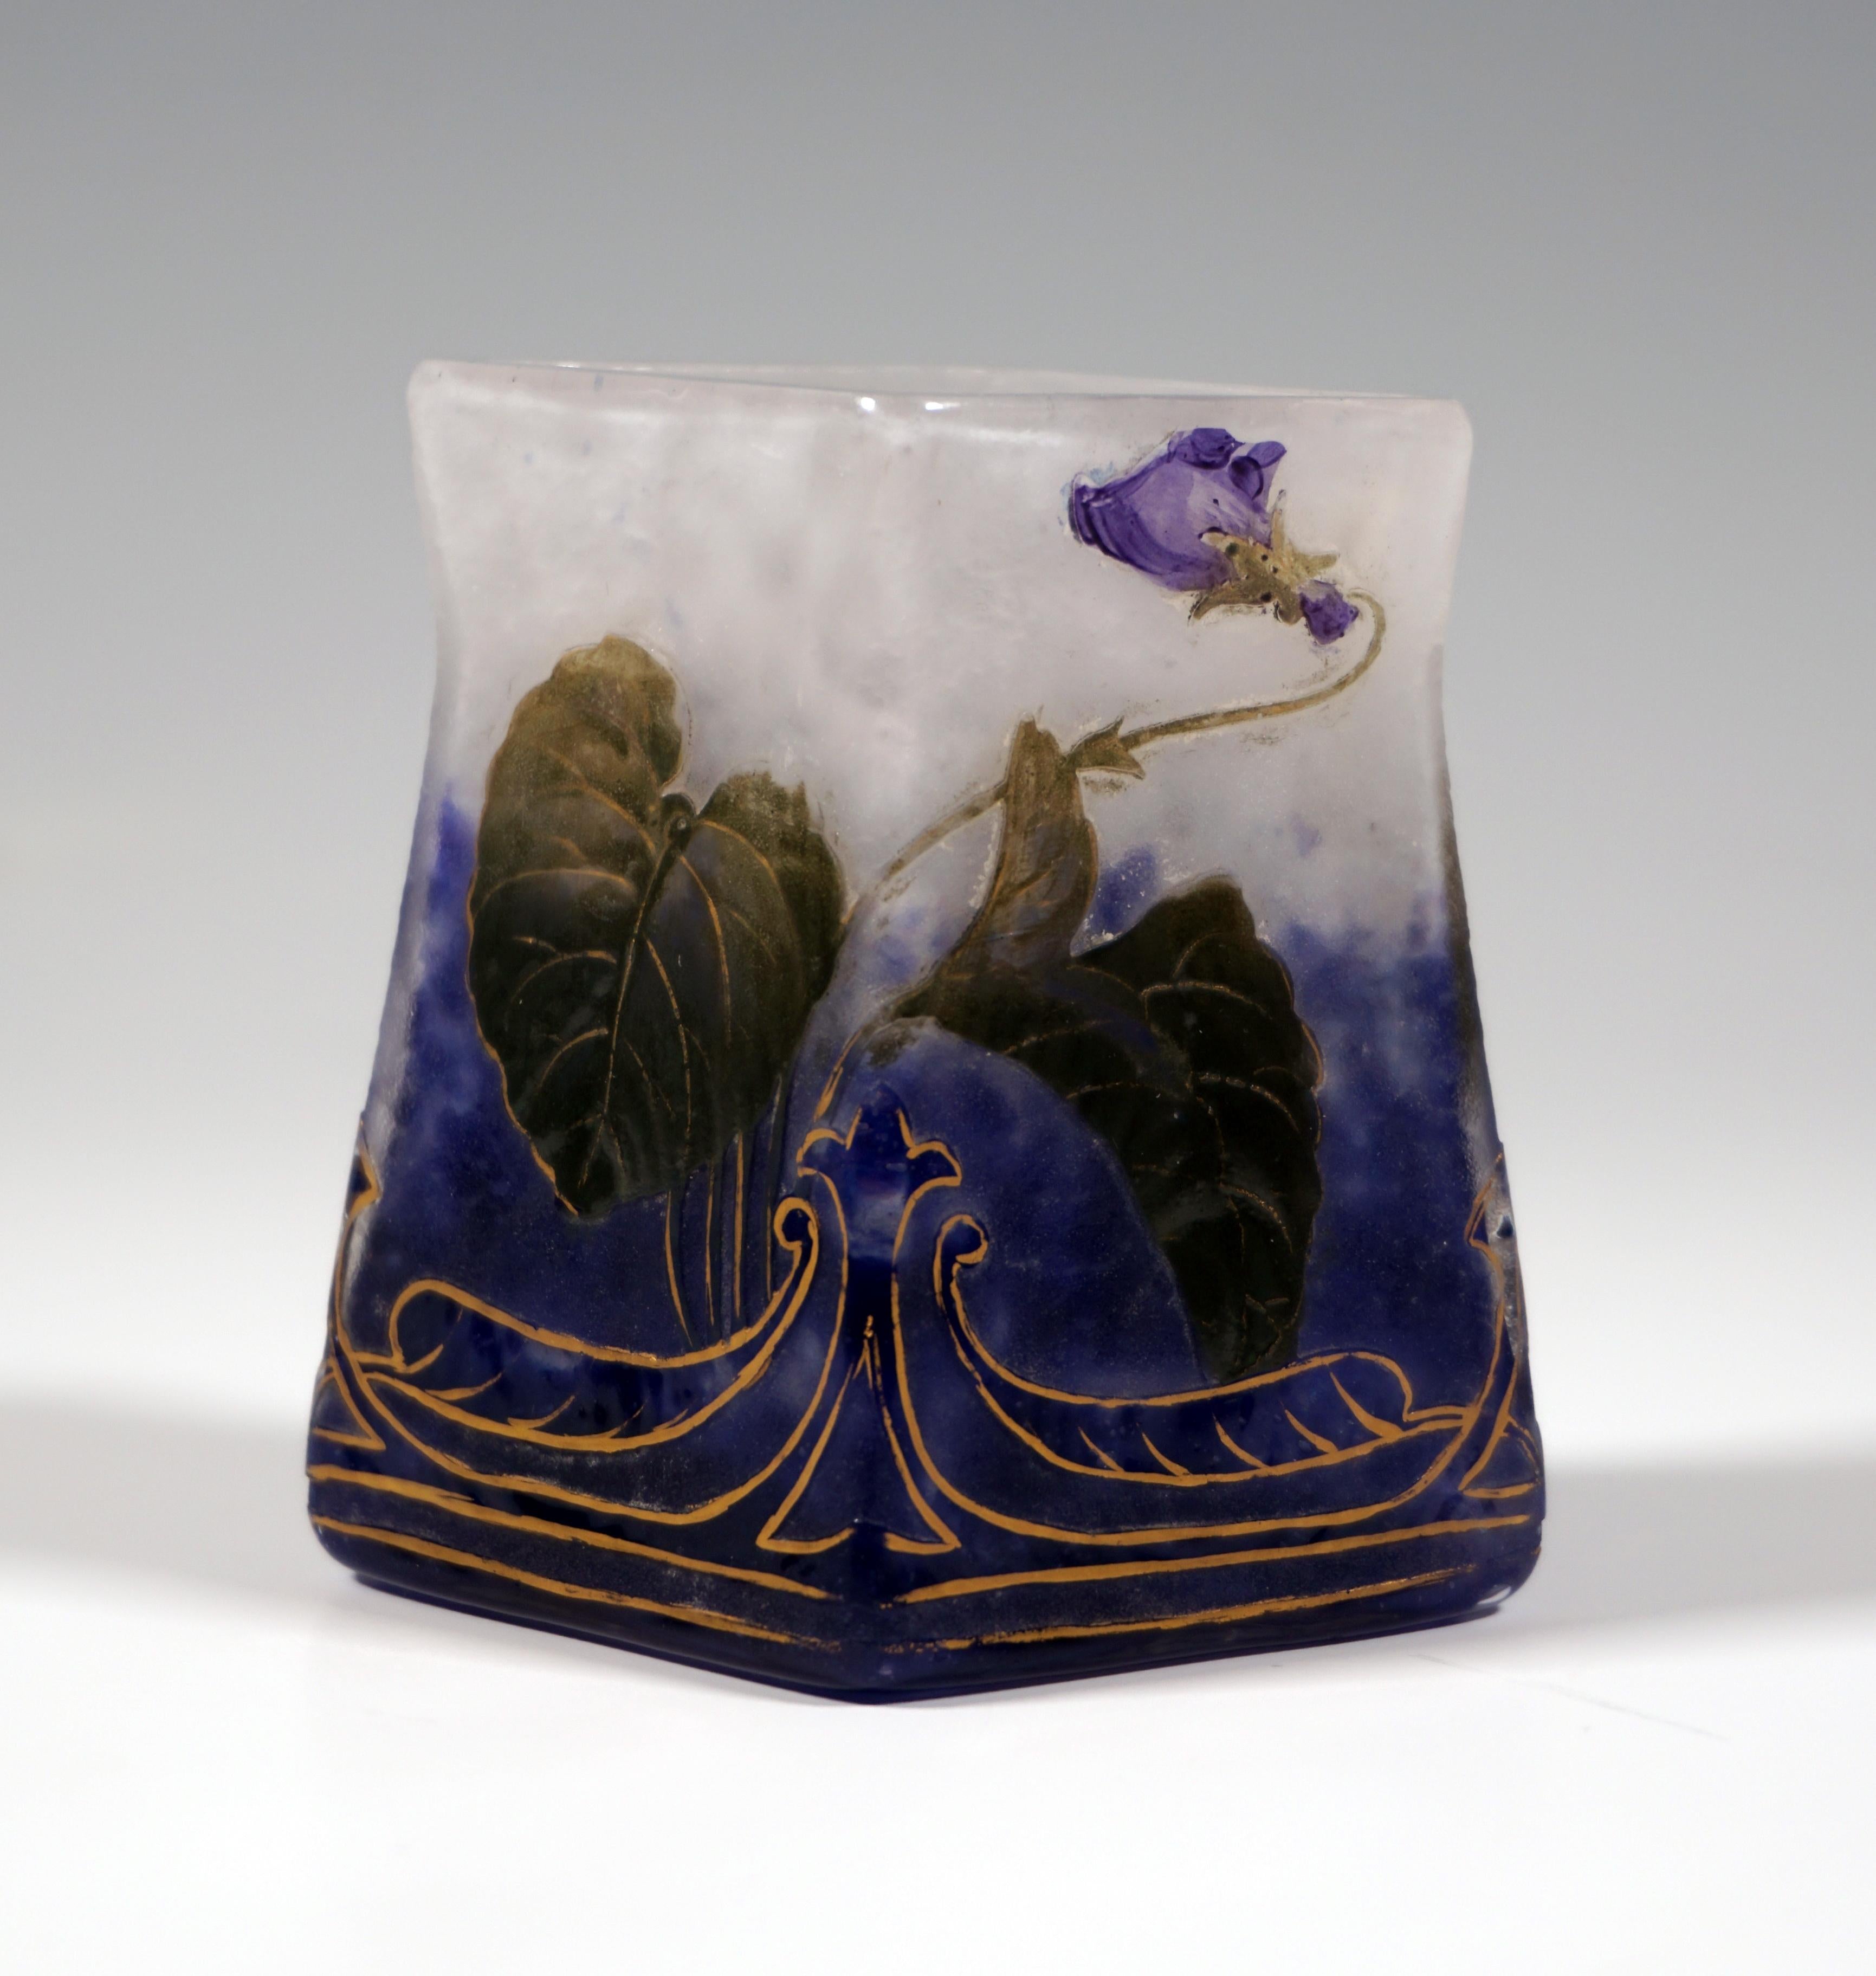 Early 20th Century Daum Nancy Art Nouveau Angular Vase with Violet and Gold Decor, France, ca 1904